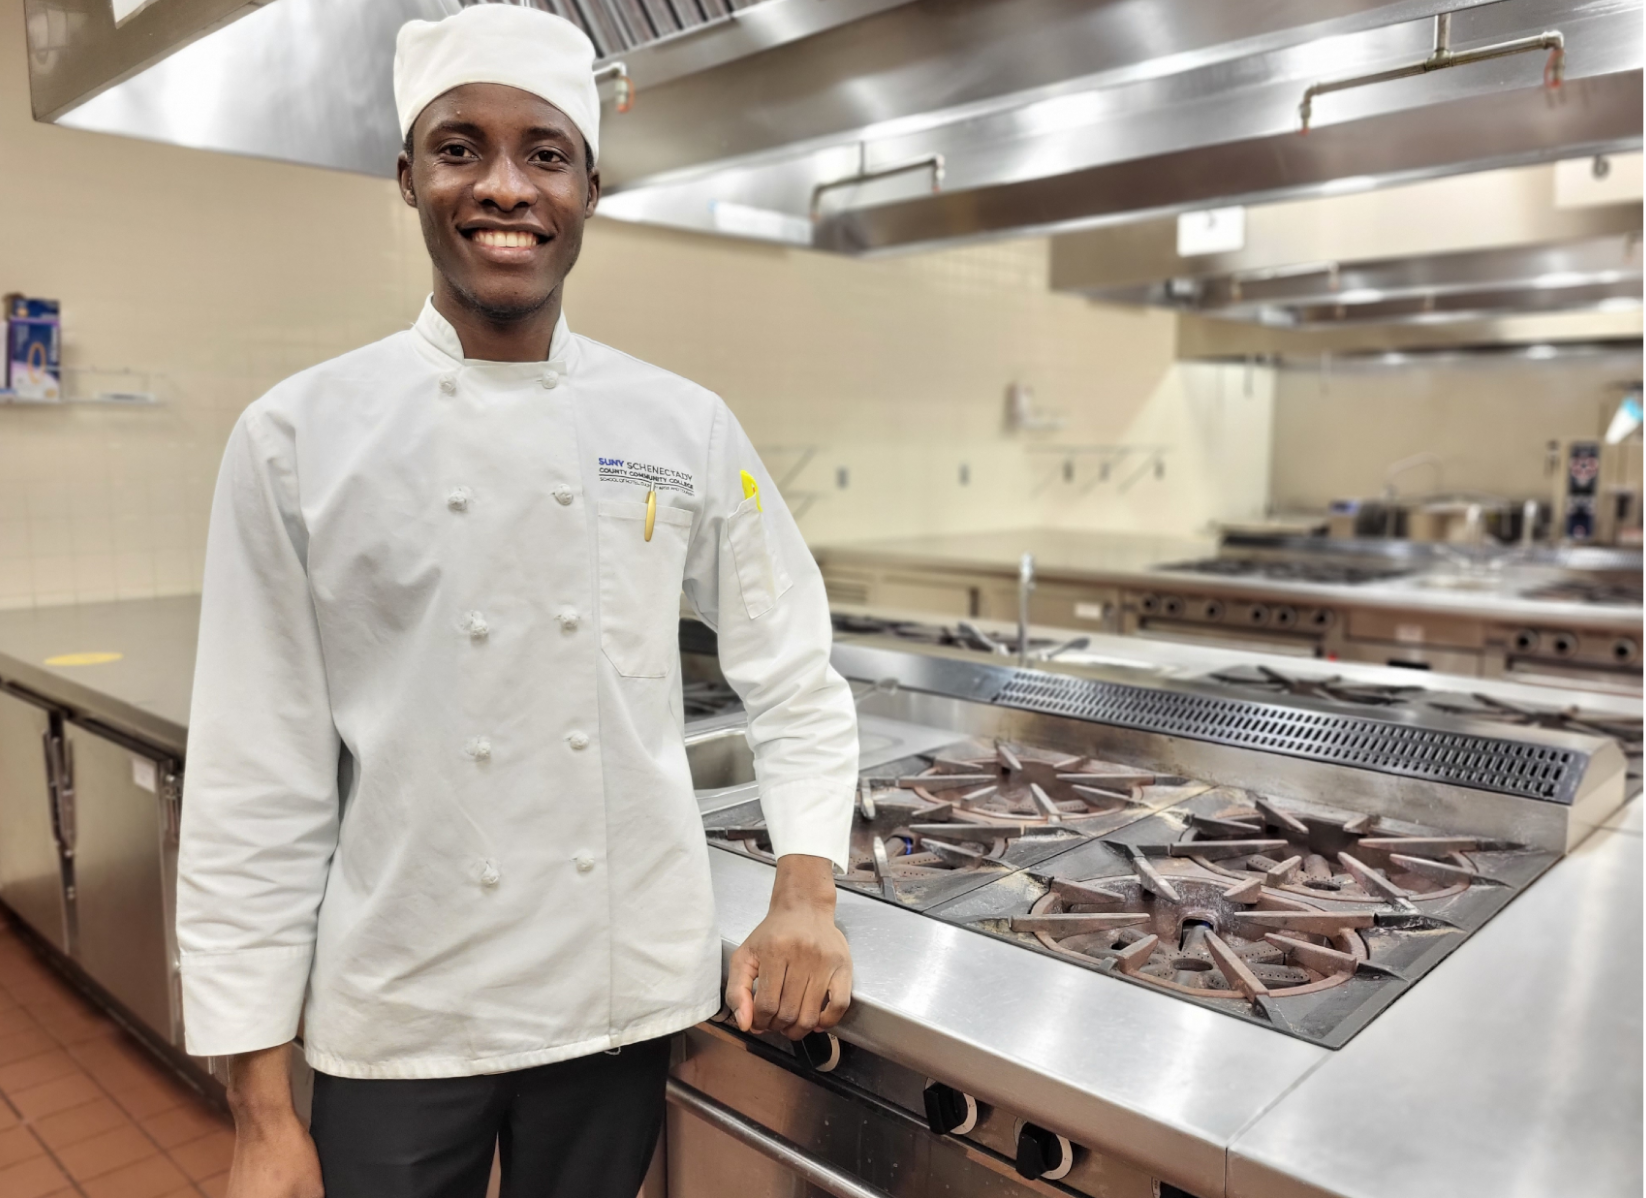 Ngambela  Zulu in chef's uniform standing in Culinary Arts Lab